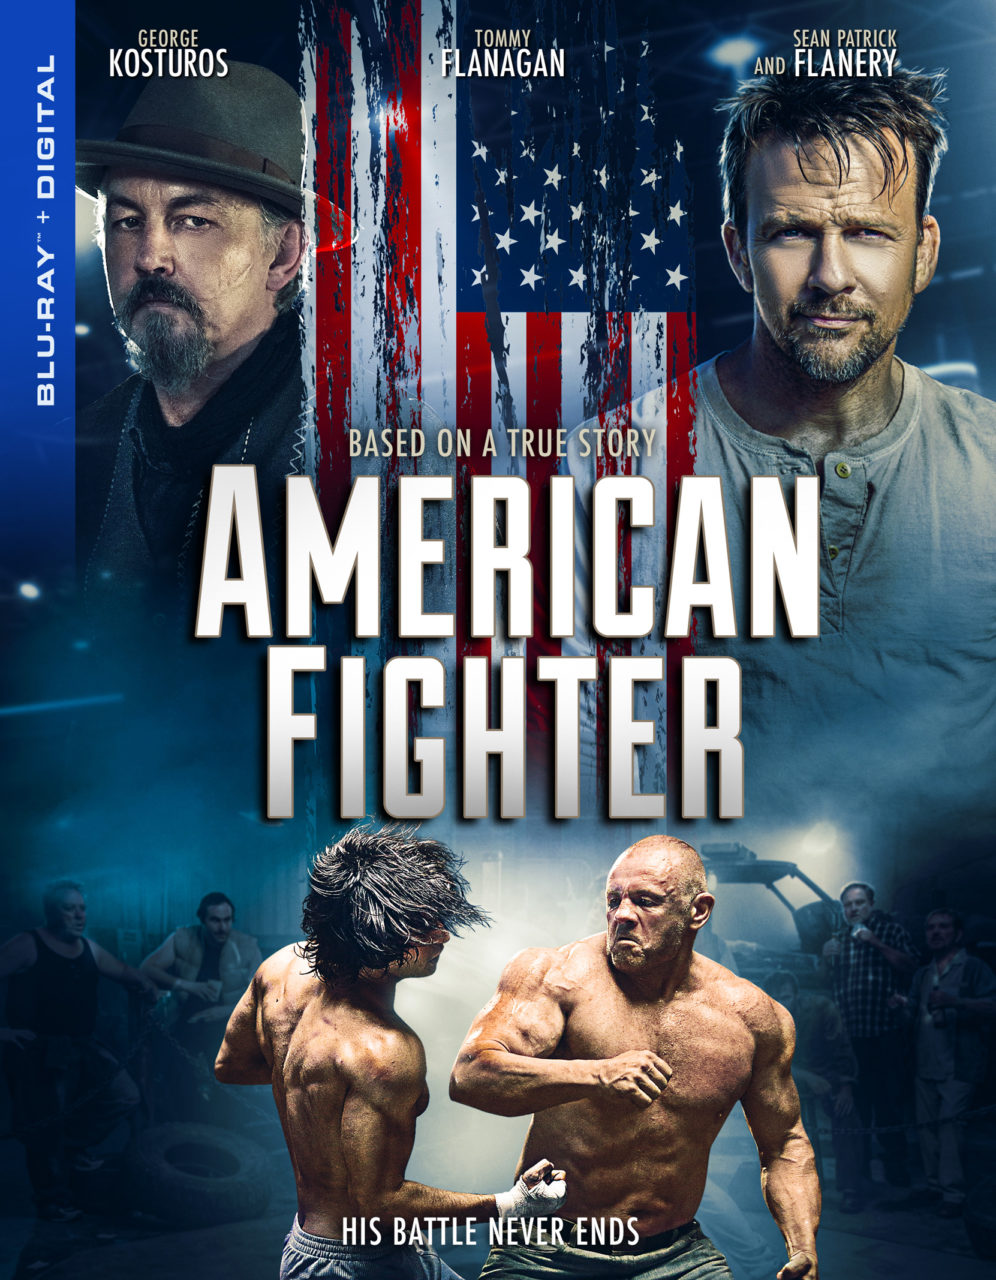 American Fighter Blu-Ray Combo Pack cover (Lionsgate)